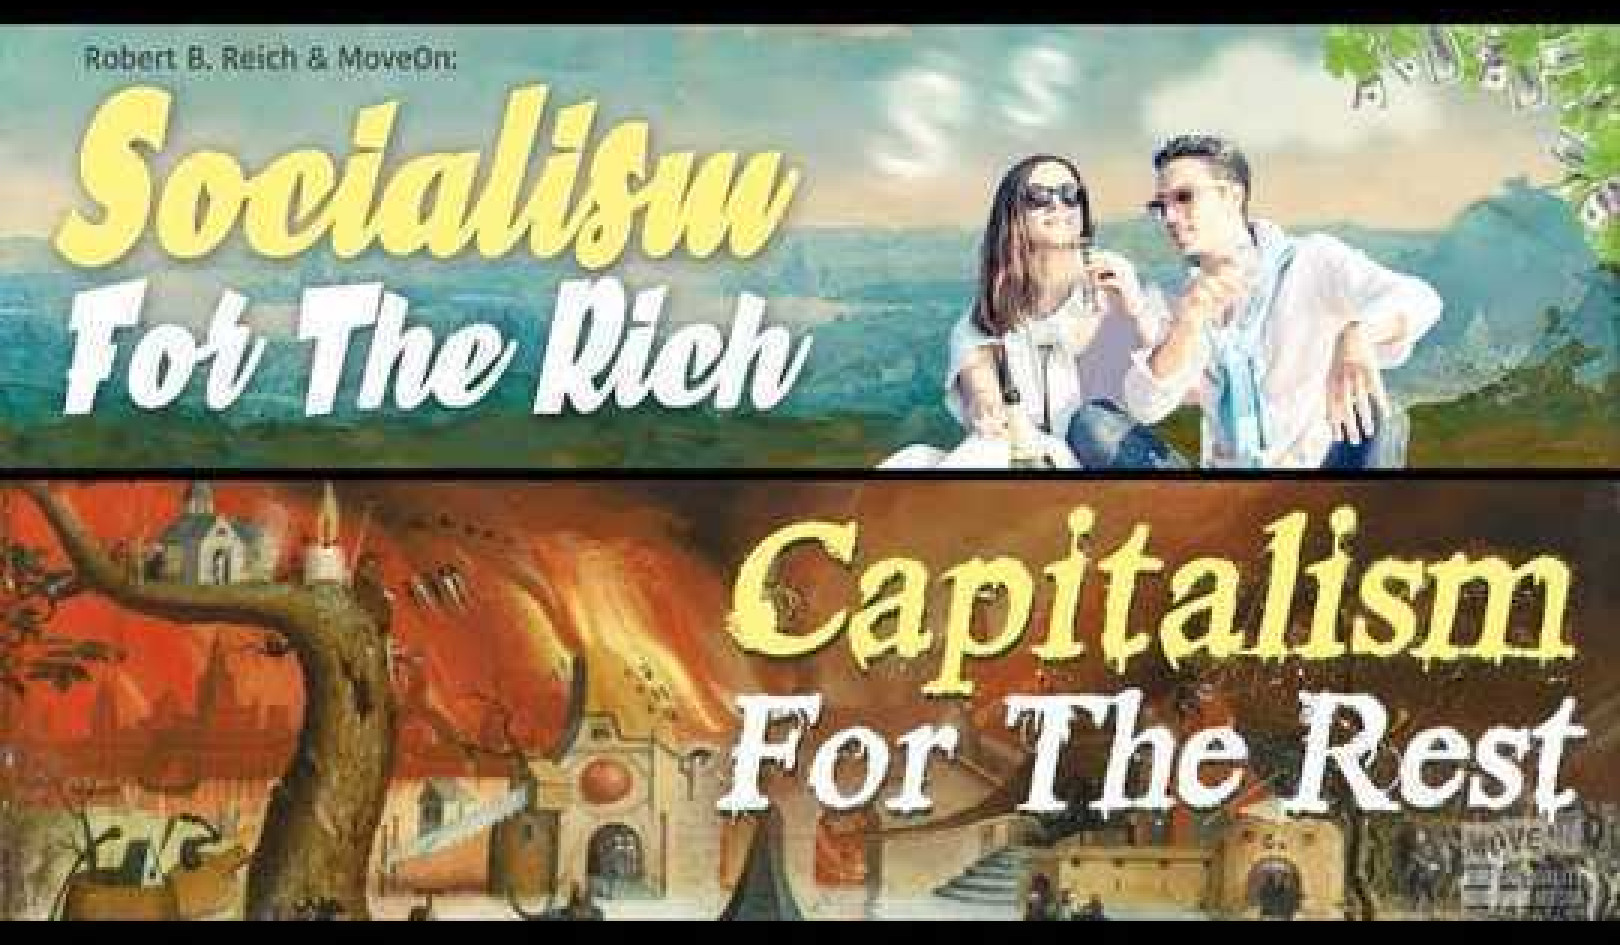 Robert Reich: Socialism of the Rich, Capitalism for the Rest